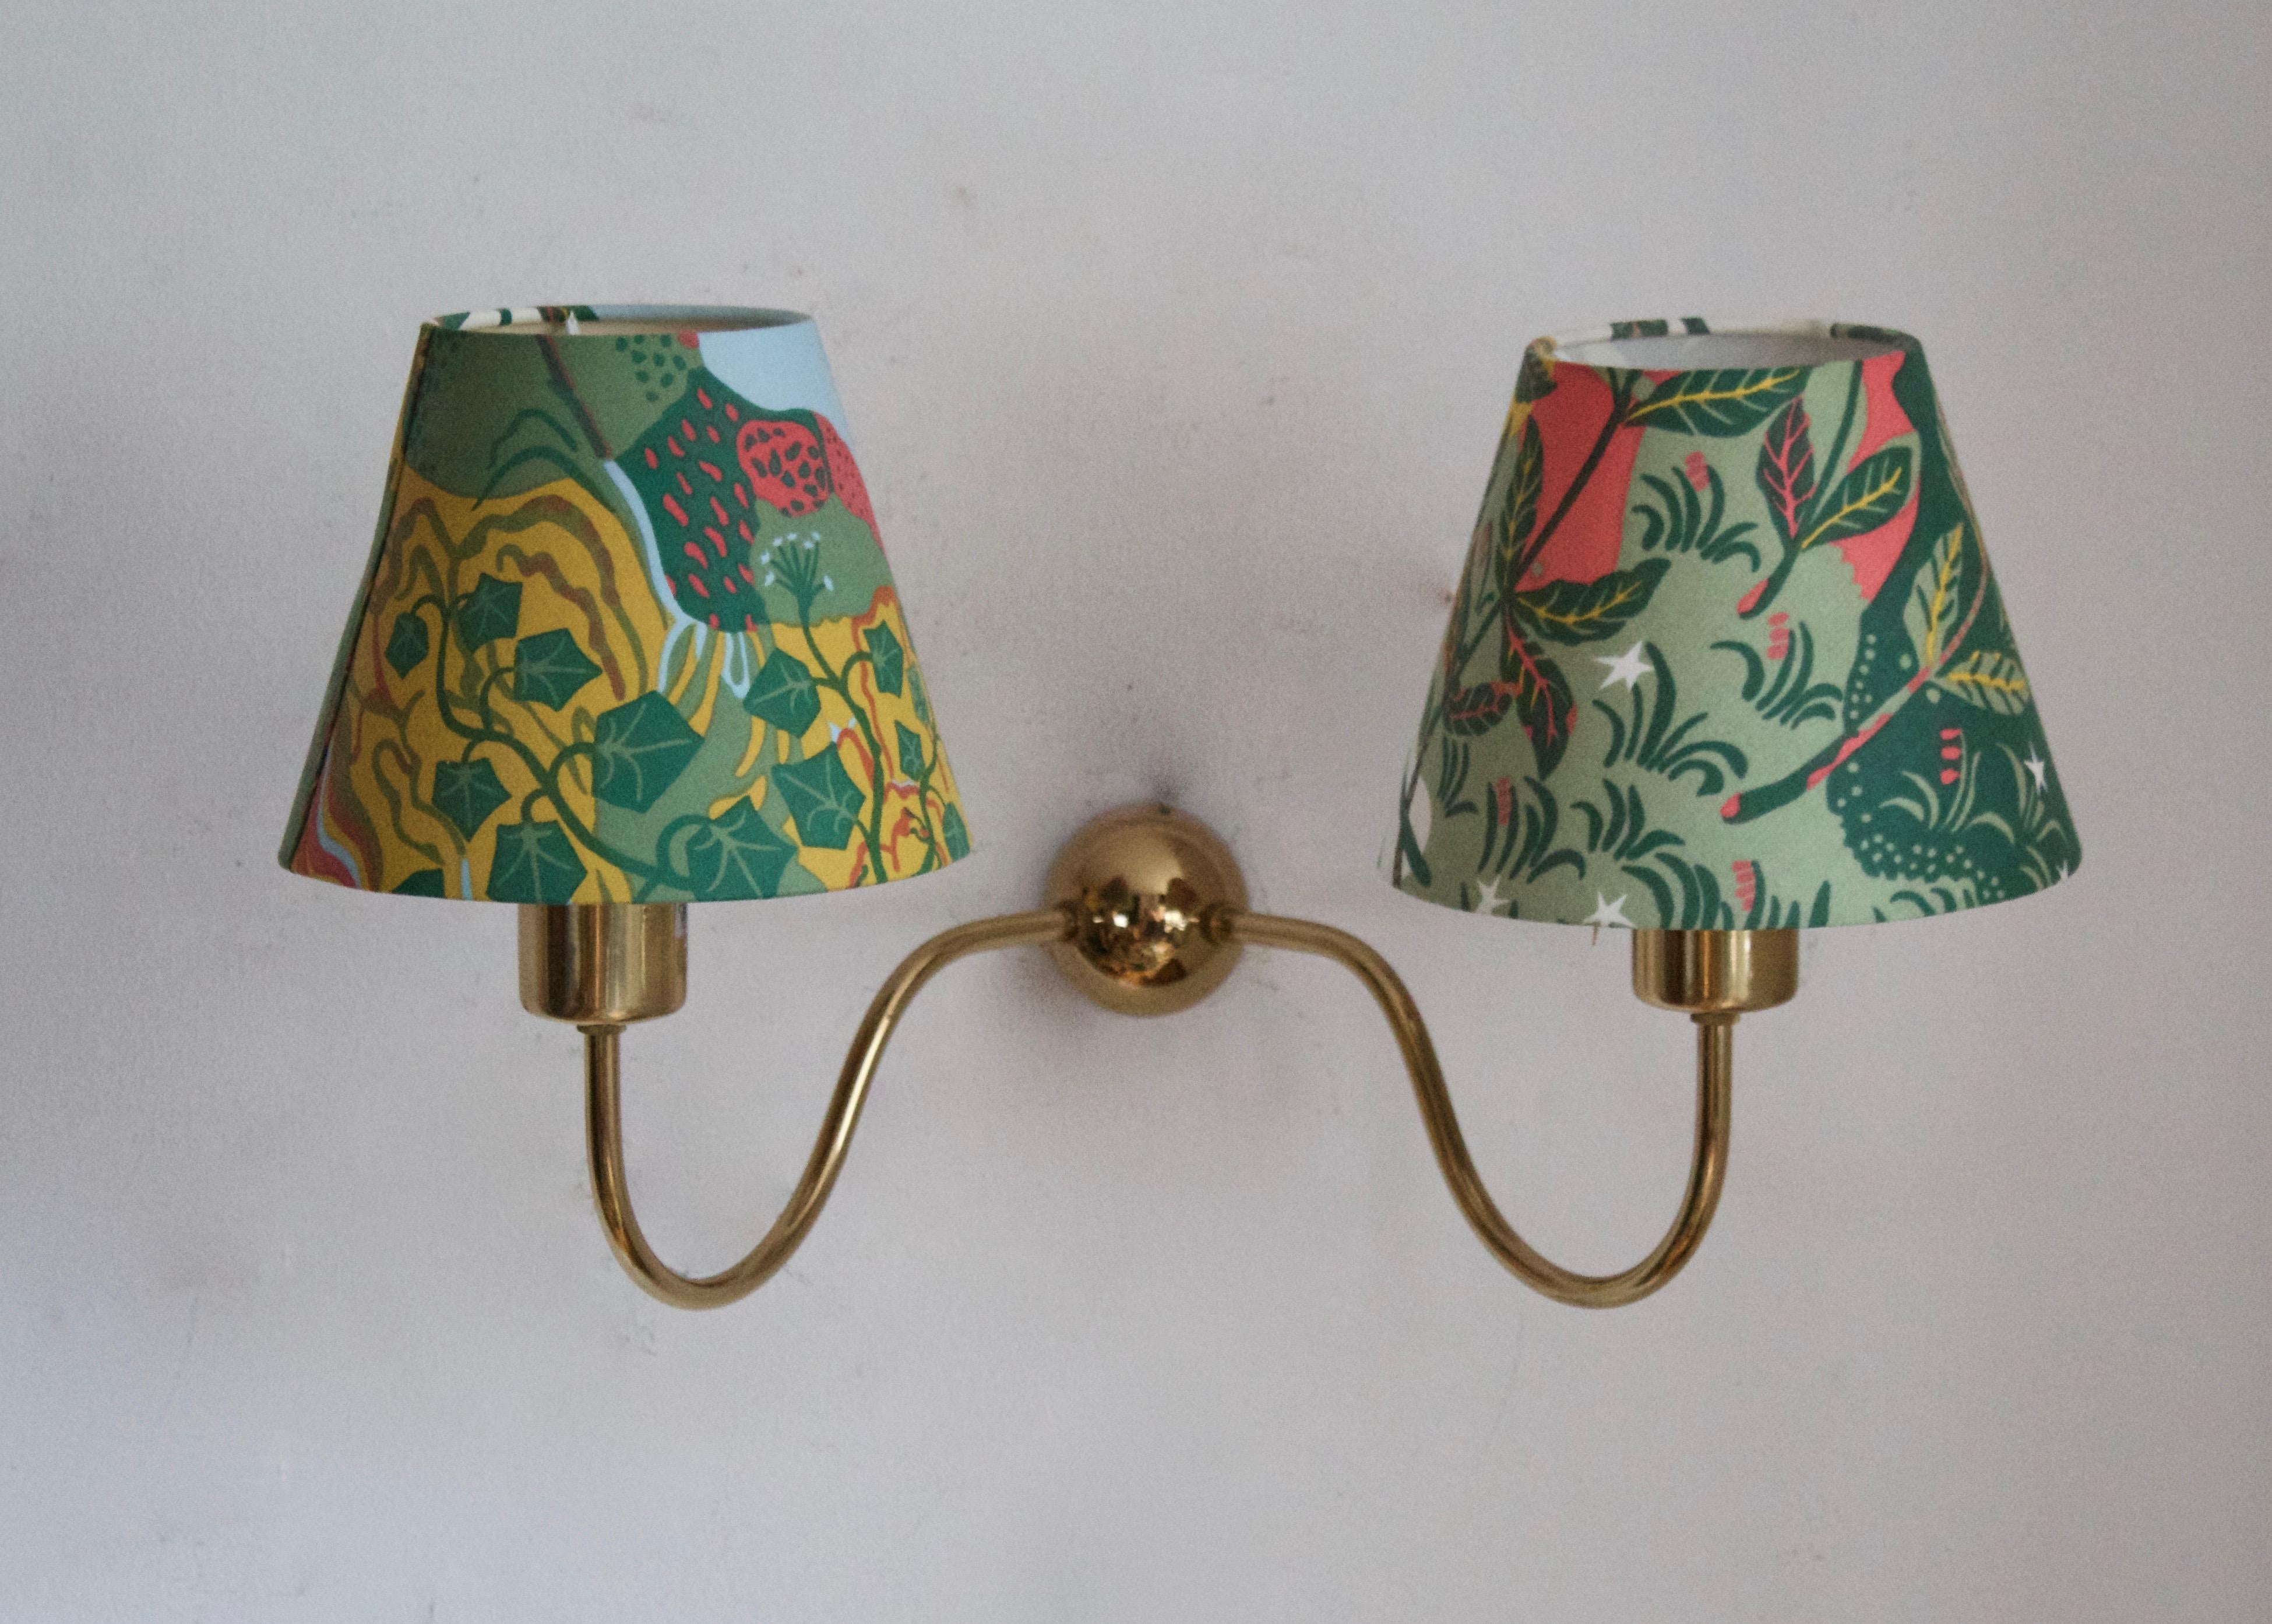 A wall light / sconce. Designed by Josef Frank, produced by Svenskt Tenn, Stockholm, Sweden. Designed in the 1920s, example produced c. 1970s. Lampshade pattern designed by Josef Frank.

Other designers of the period include Paavo Tynell, Lisa